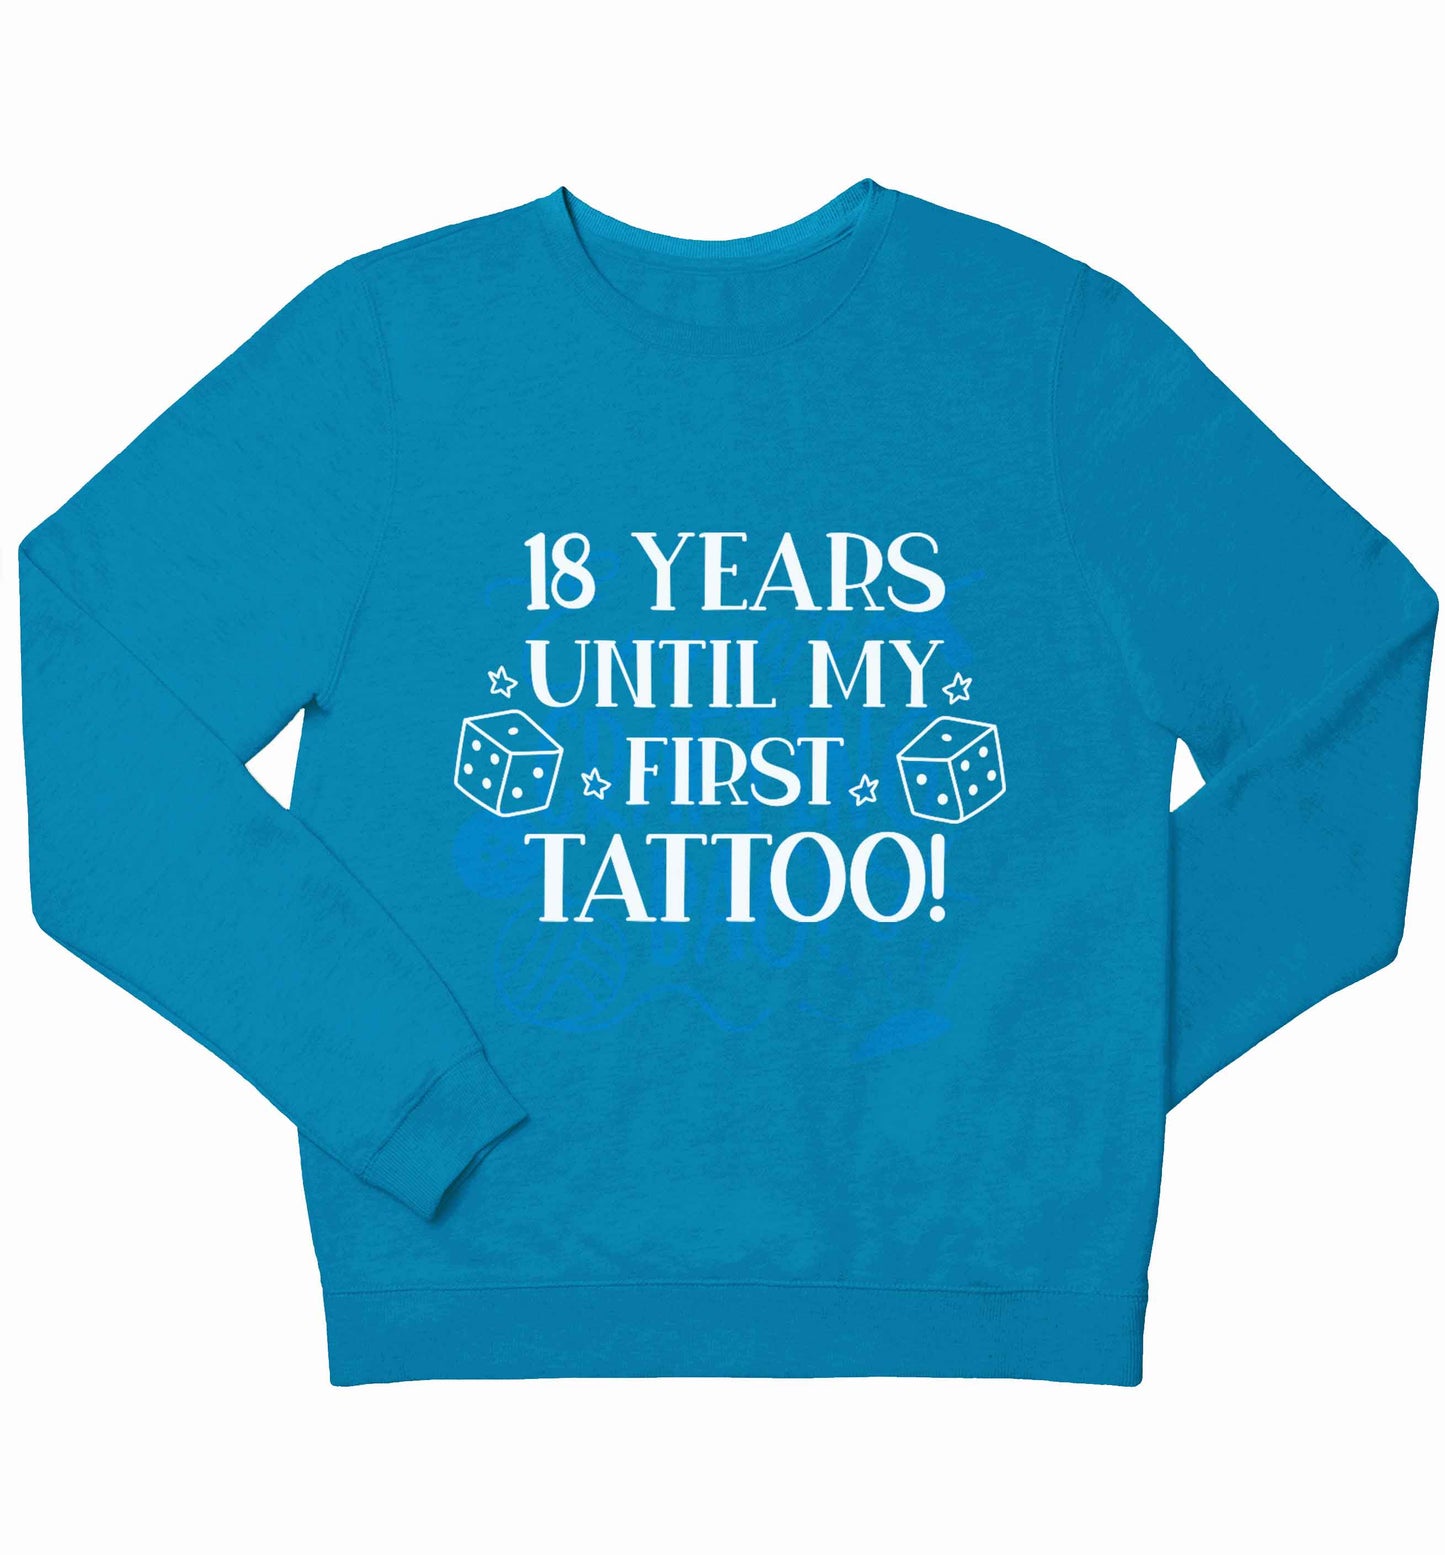 18 Years Until my First Tattoo children's blue sweater 12-13 Years